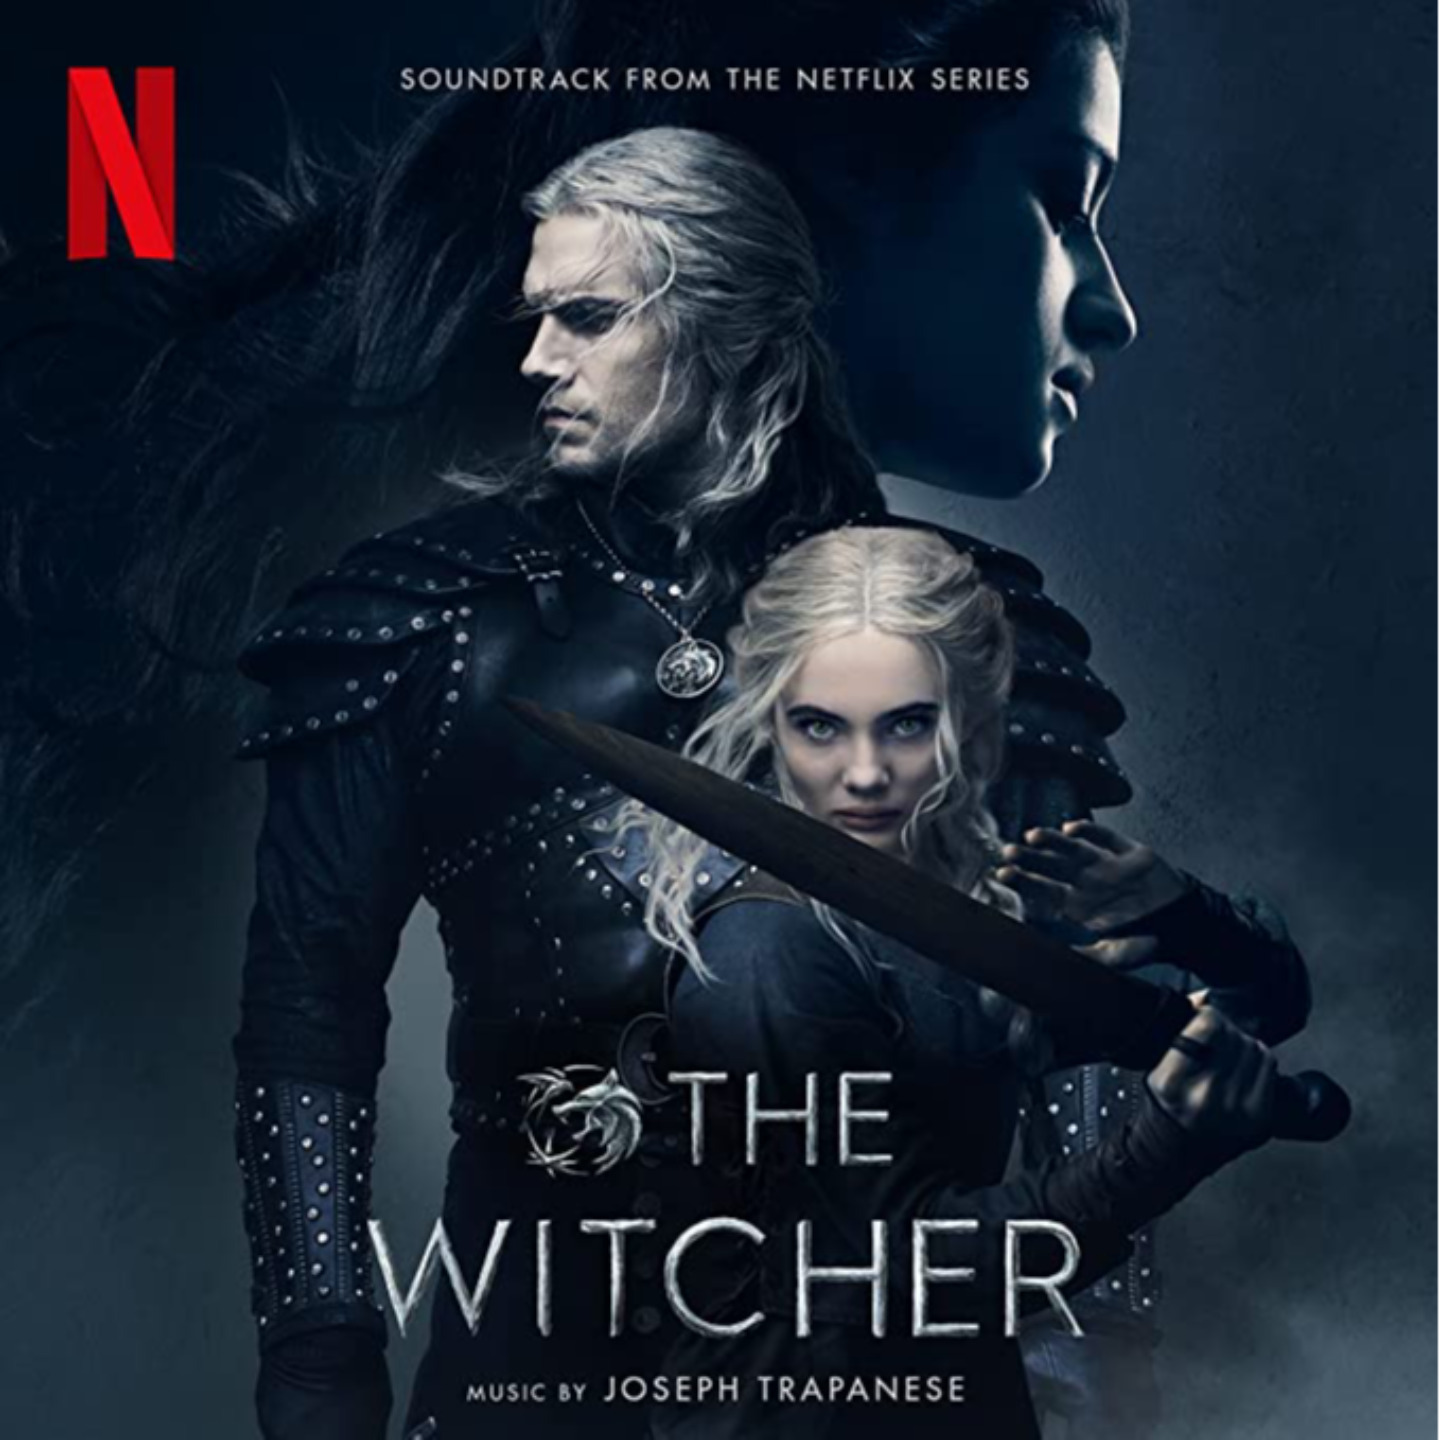 JOSEPH TRAPANESE - The Witcher Season 2 - Soundtrack From The Netflix Series 2xLP